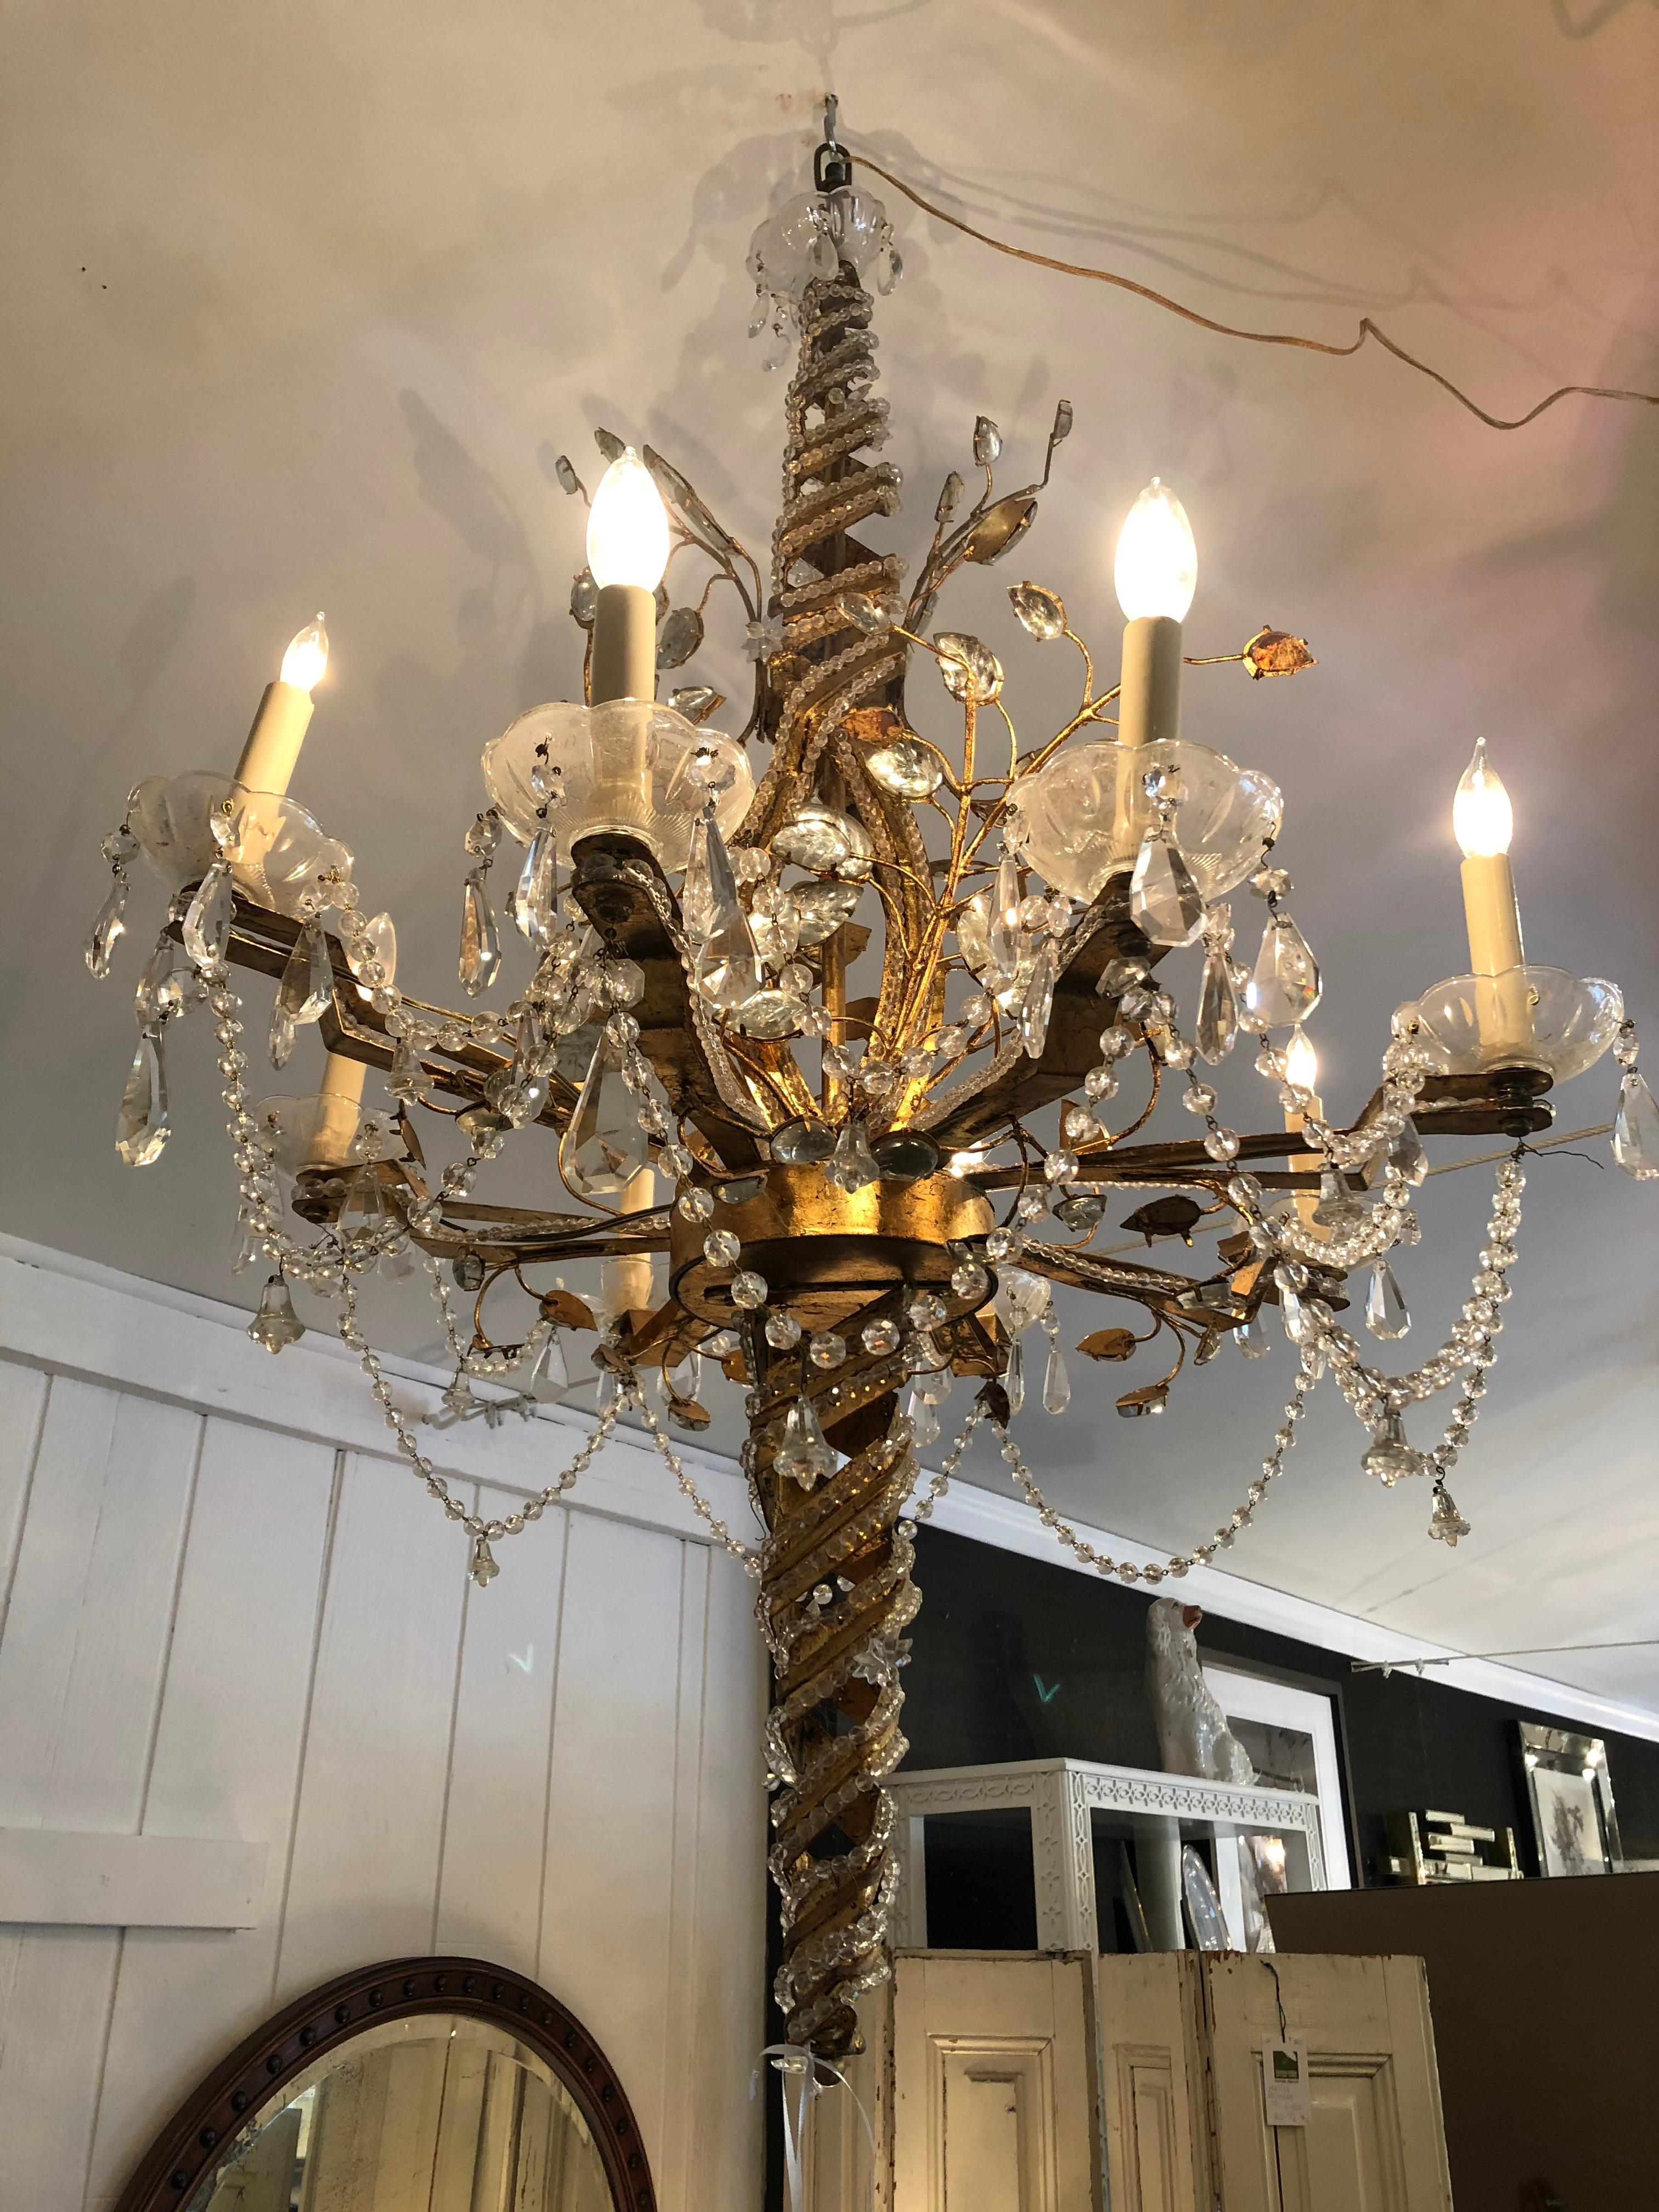 Maison Baguès remains the last word in classic French lighting, and this large ornate chandelier is emblematic of their craftsmanship and glamorous sophistication. A twisted braided cone of gilt and crystals creates the central shaft, having 8 arms,